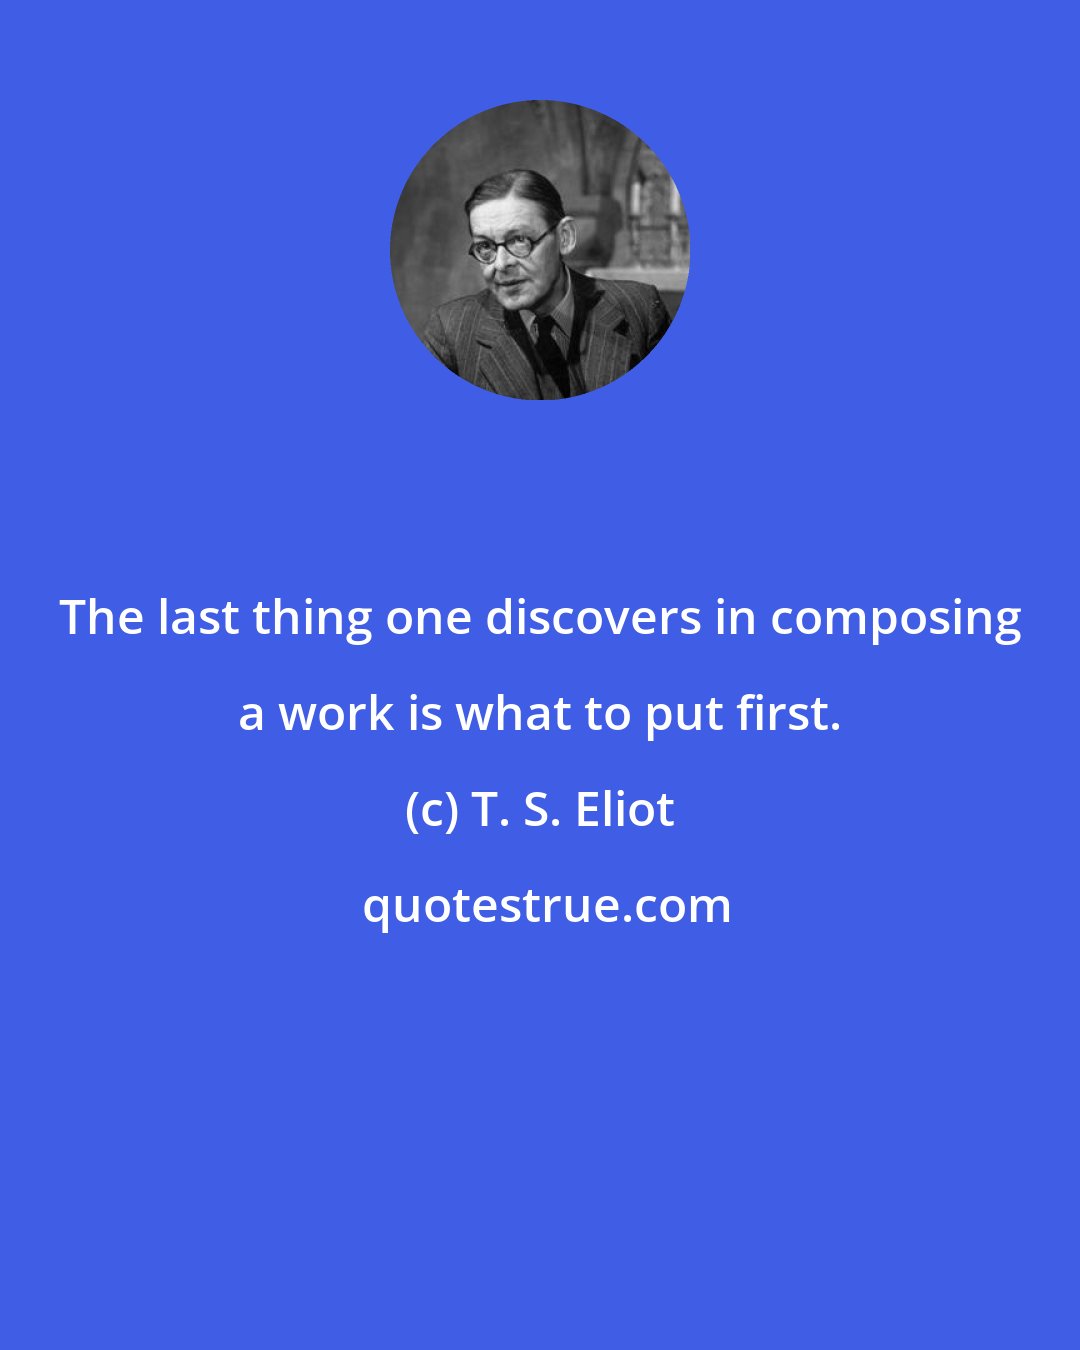 T. S. Eliot: The last thing one discovers in composing a work is what to put first.